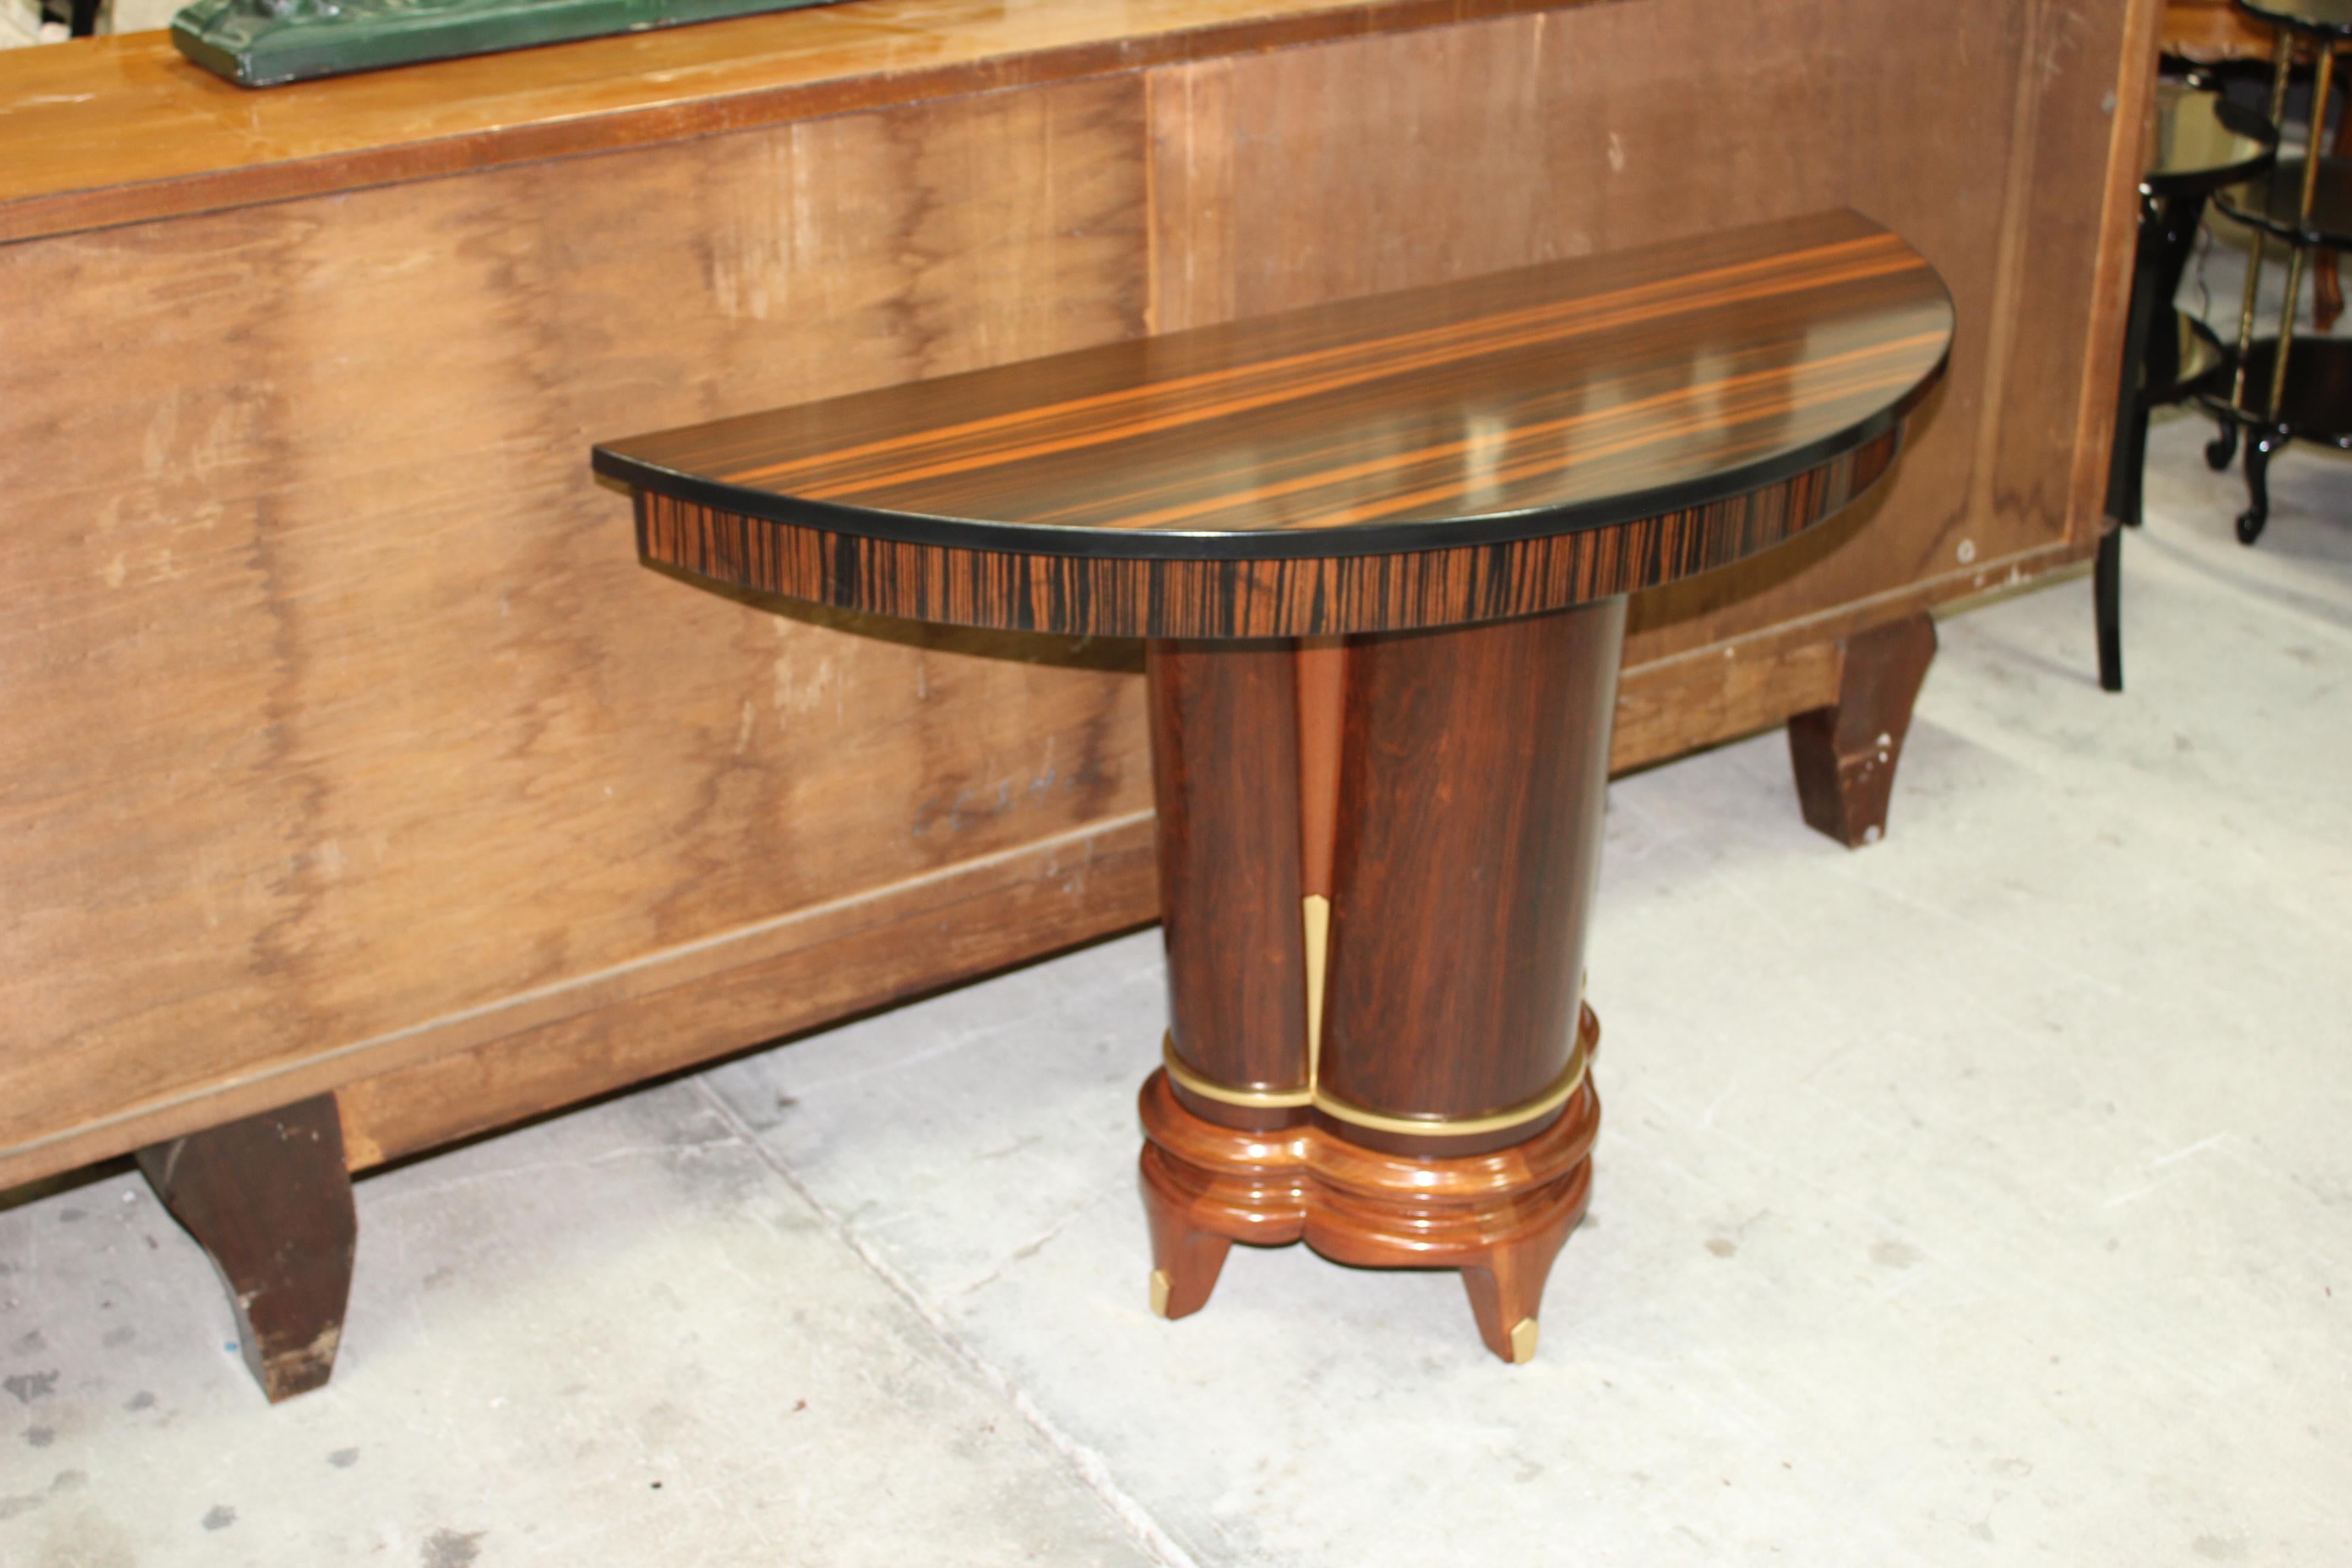 Mid-20th Century French Art Deco Exotic Macassar Ebony Console Tables, circa 1940s For Sale